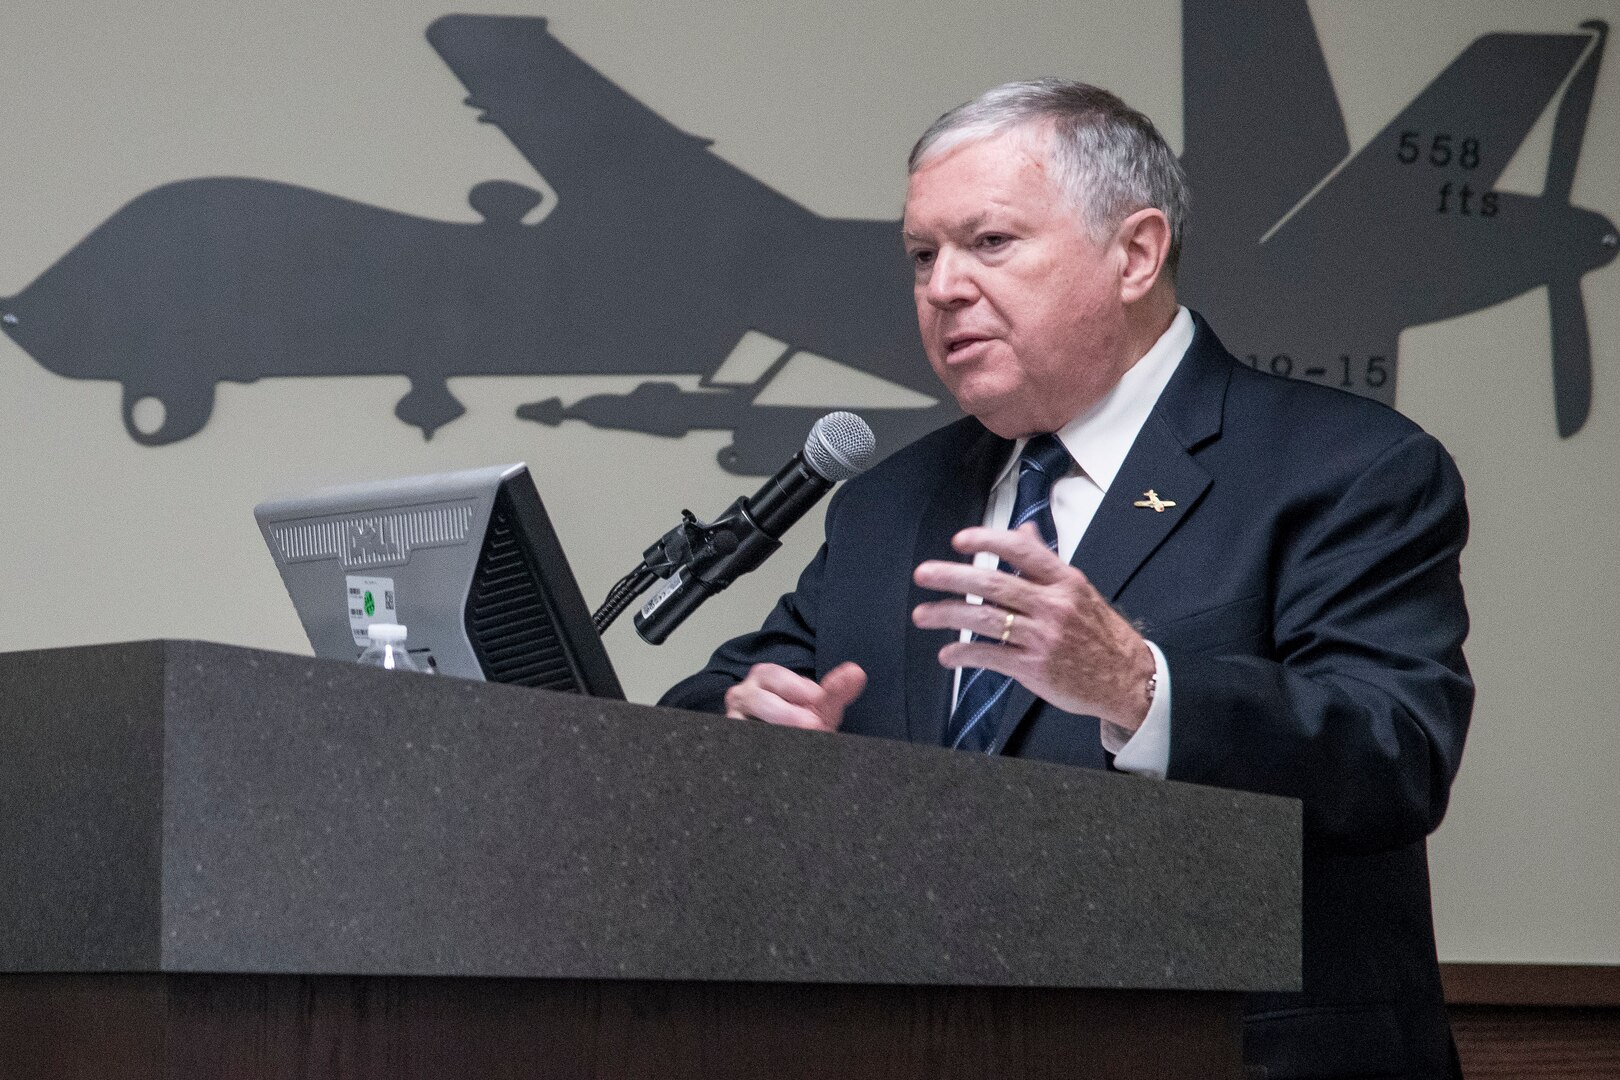 James Clark, family friend of the Crawford family, speaks during the 558th Flying Training Squadron’s Oliver “Ollie” Crawford Hall building dedication ceremony Nov. 13, 2019, at Joint Base San Antonio-Randolph, Texas. Crawford was a pilot, charter member of the Air Force Association and was instrumental in the formation of the Air Force Memorial in Washington, D.C. Crawford Hall is home to the 558th FTS, which is the sole source for all U.S. Air Force and U.S. Marine Corps undergraduate remotely piloted aircraft pilot and sensor operator training. (U.S. Air Force photo by Sean M. Worrell)